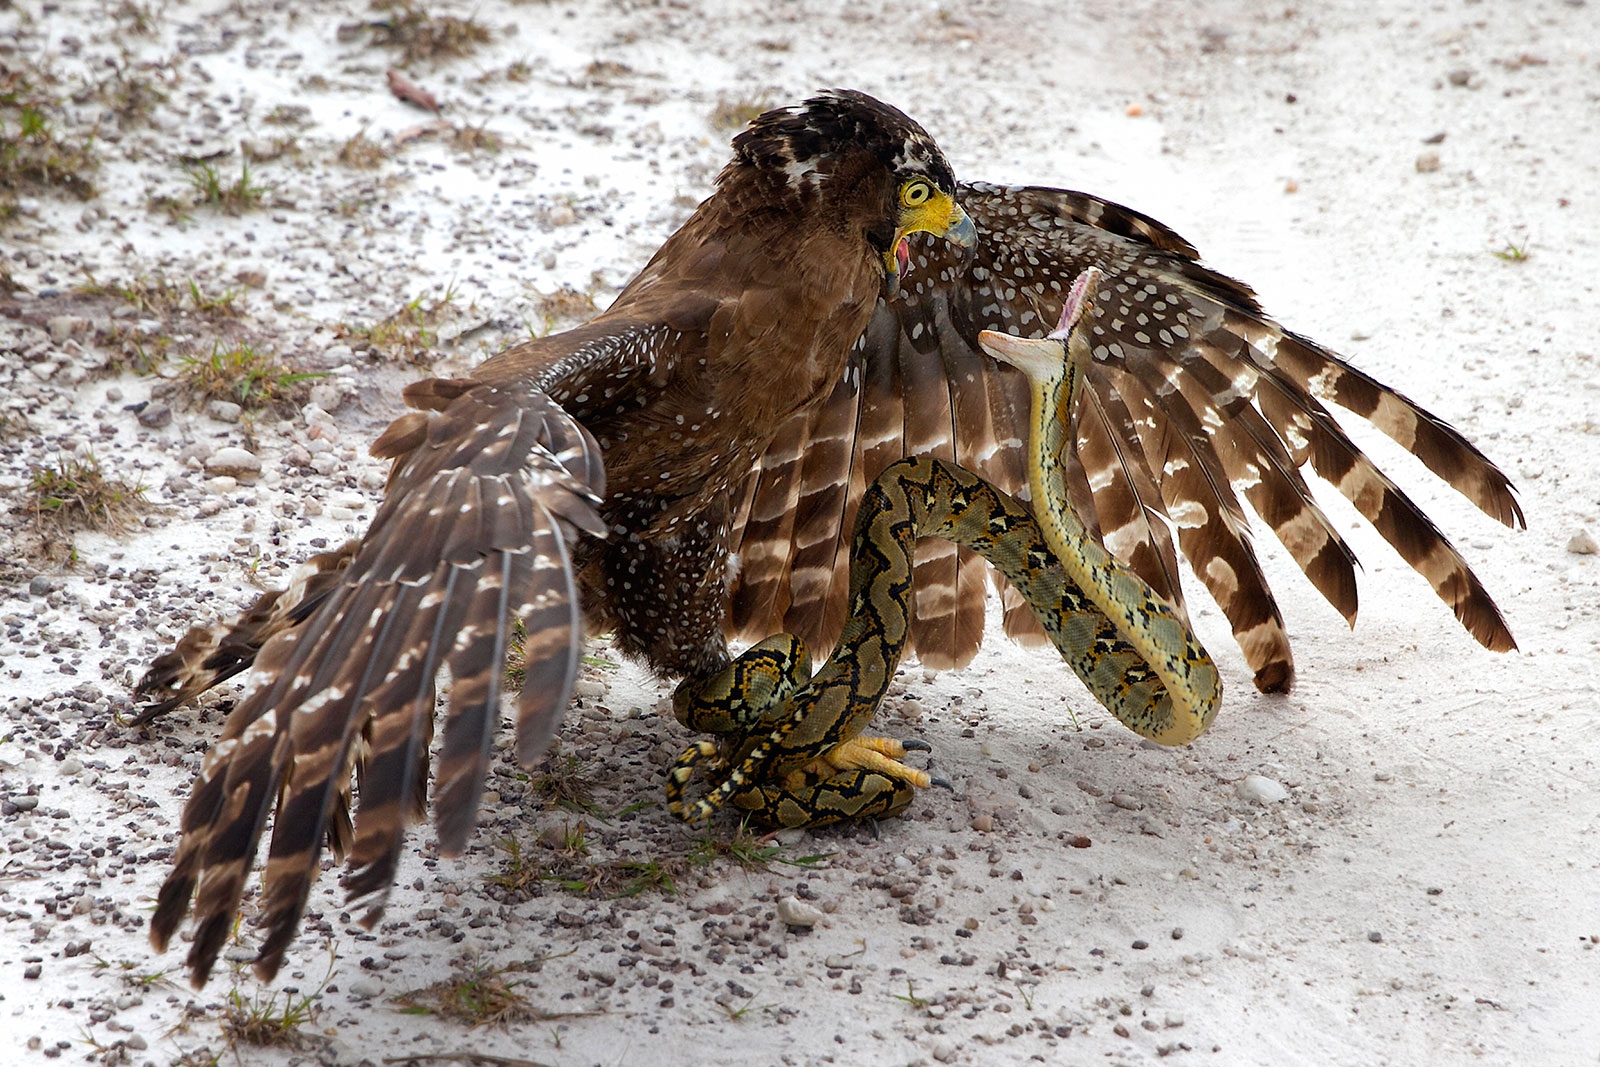 General 1600x1067 nature animals winter birds snake falcons snow wings feathers fighting wildlife Mexico